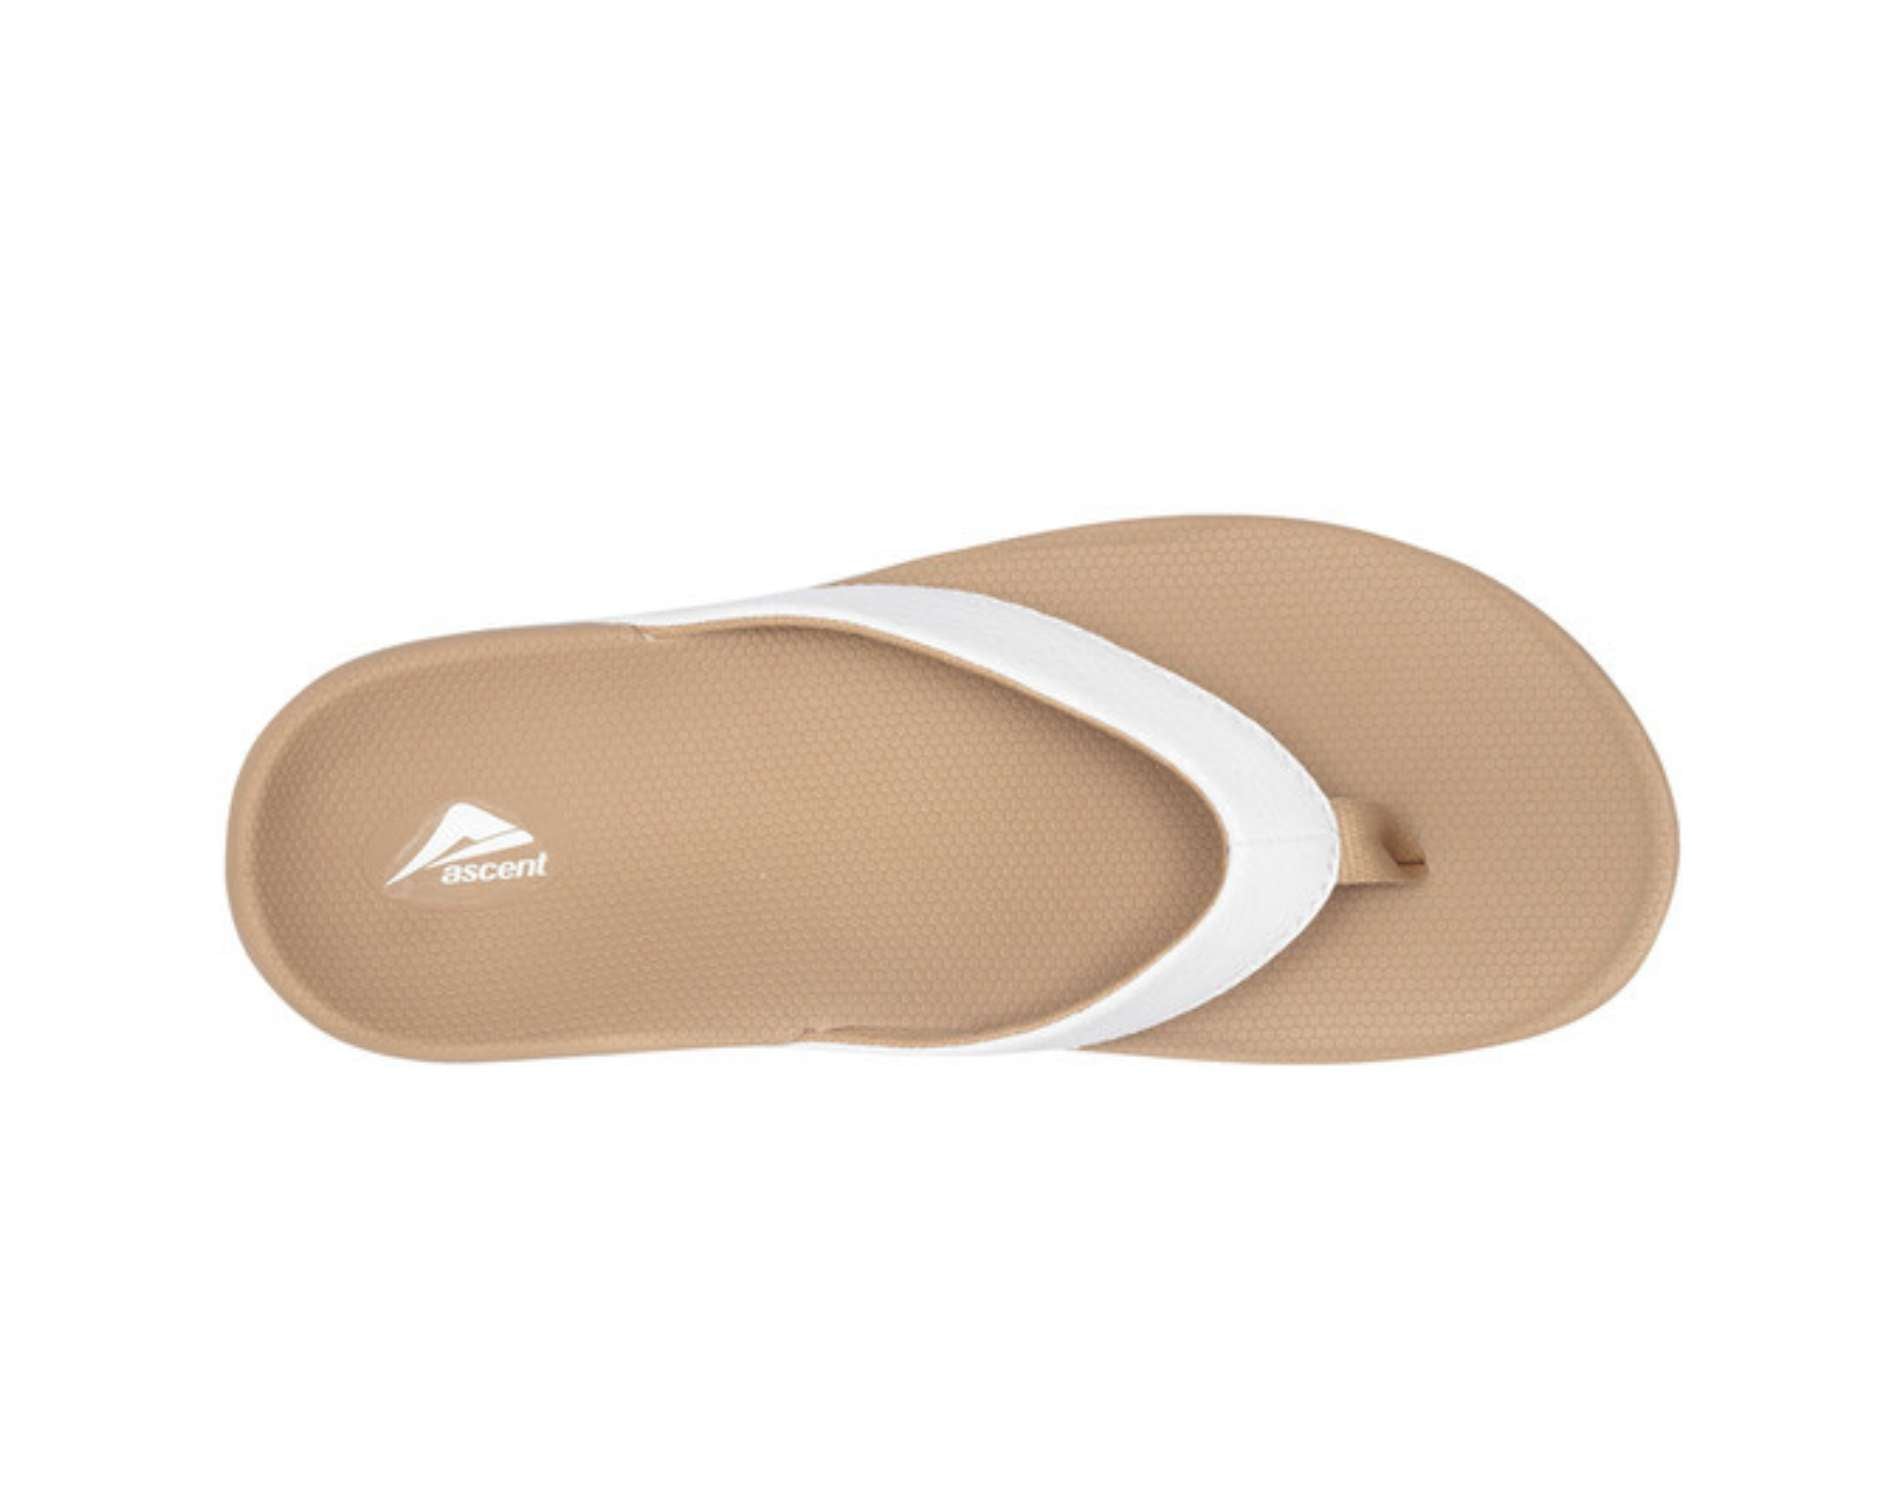 Ascent's Groove sandals for women in white colour